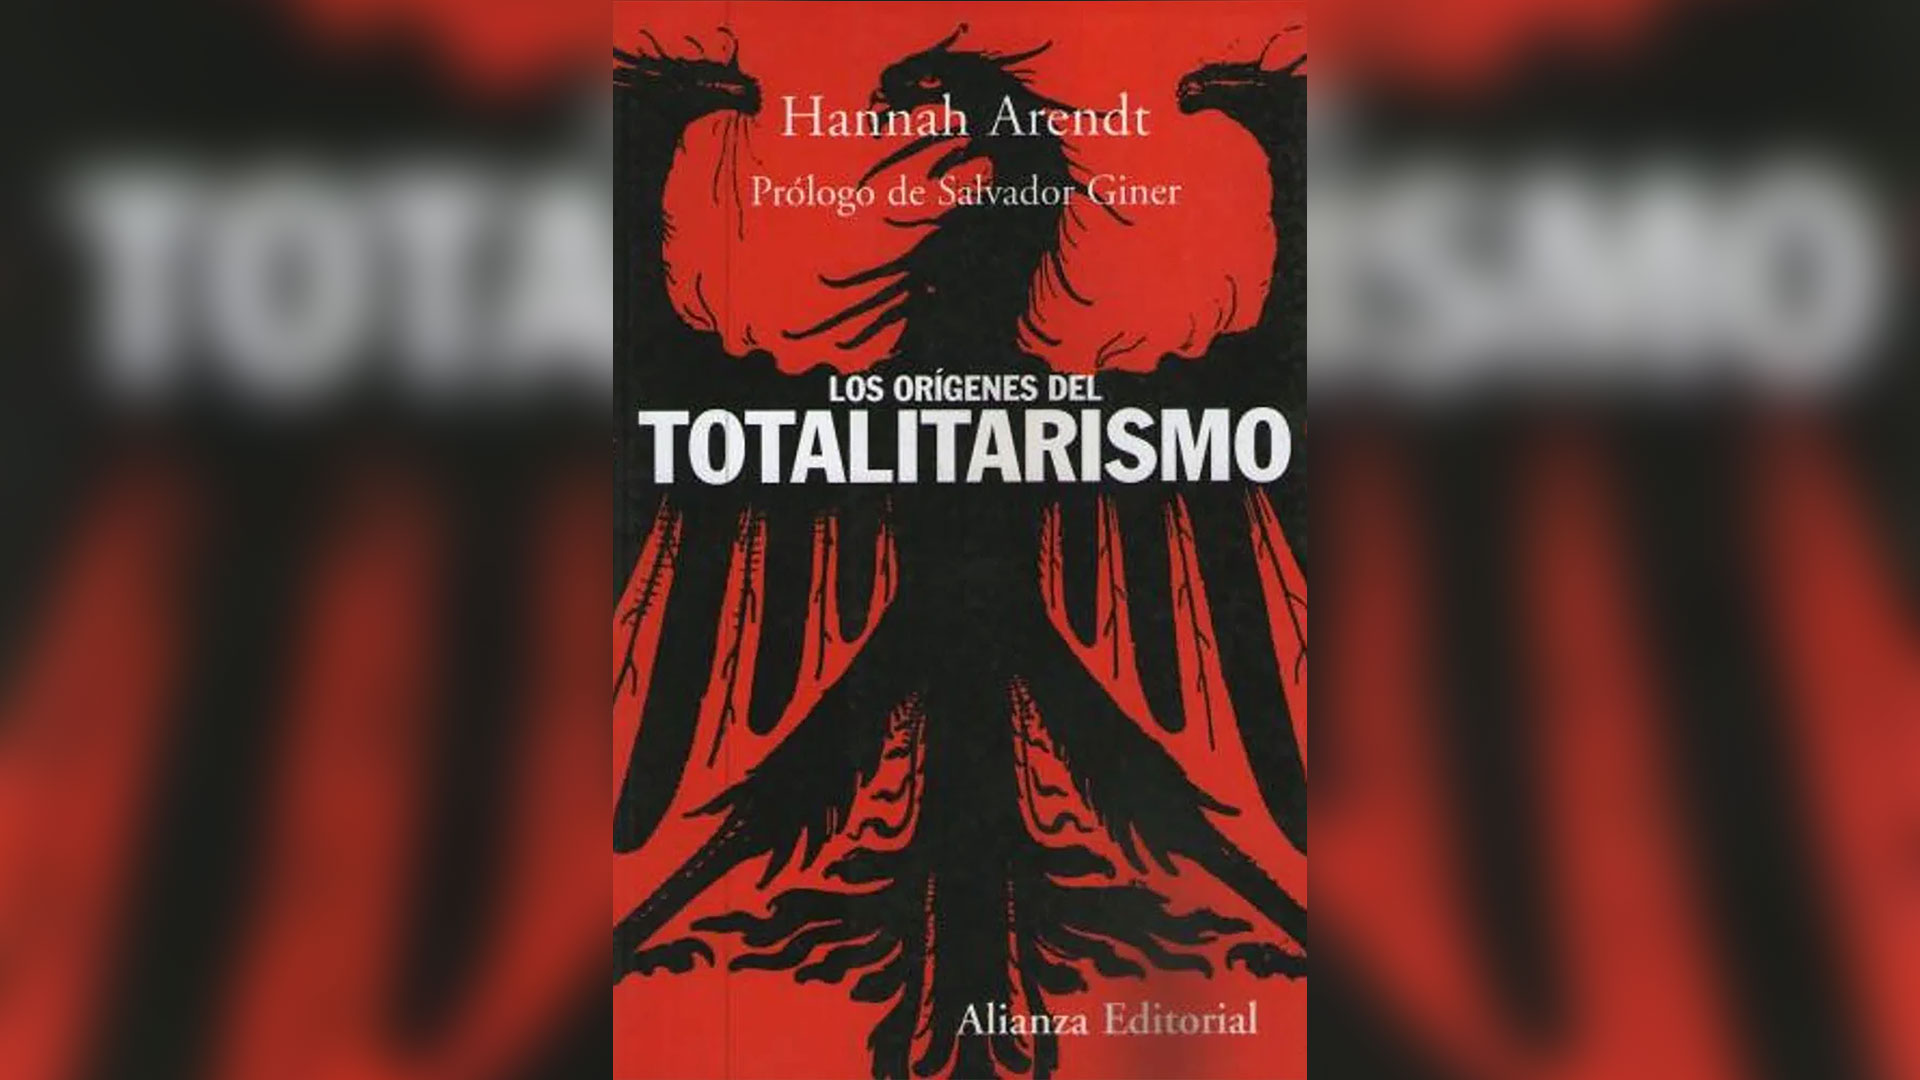 "The origins of totalitarianism"one of Arendt's masterpieces.